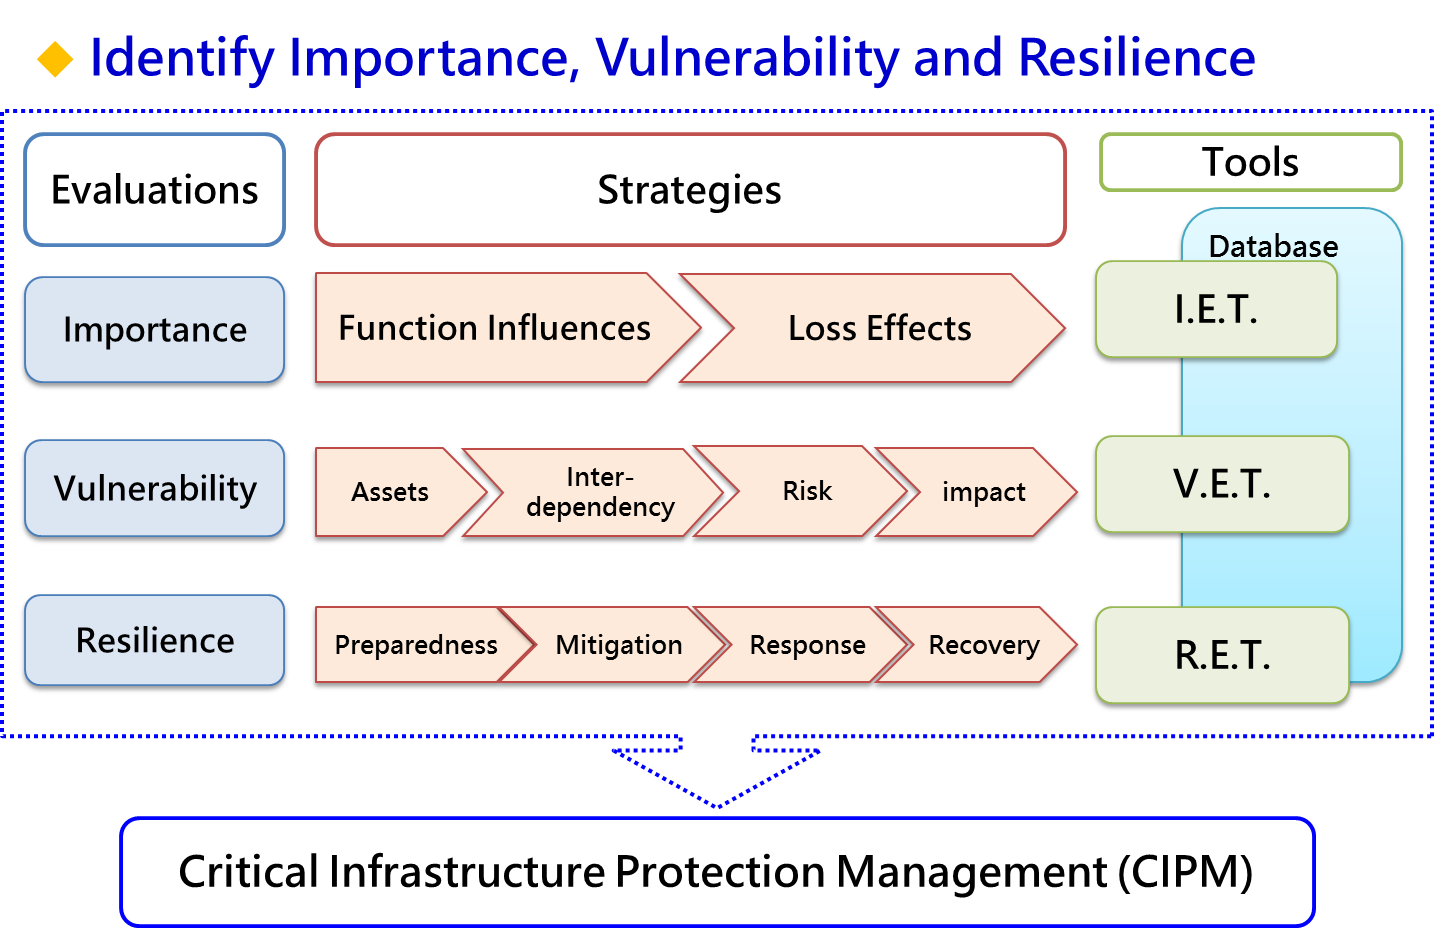 Introduced Business Continuity Management (BCM) into Critical Infrastructure Protection (CIP) Implementation Strategies and established CIP management tools